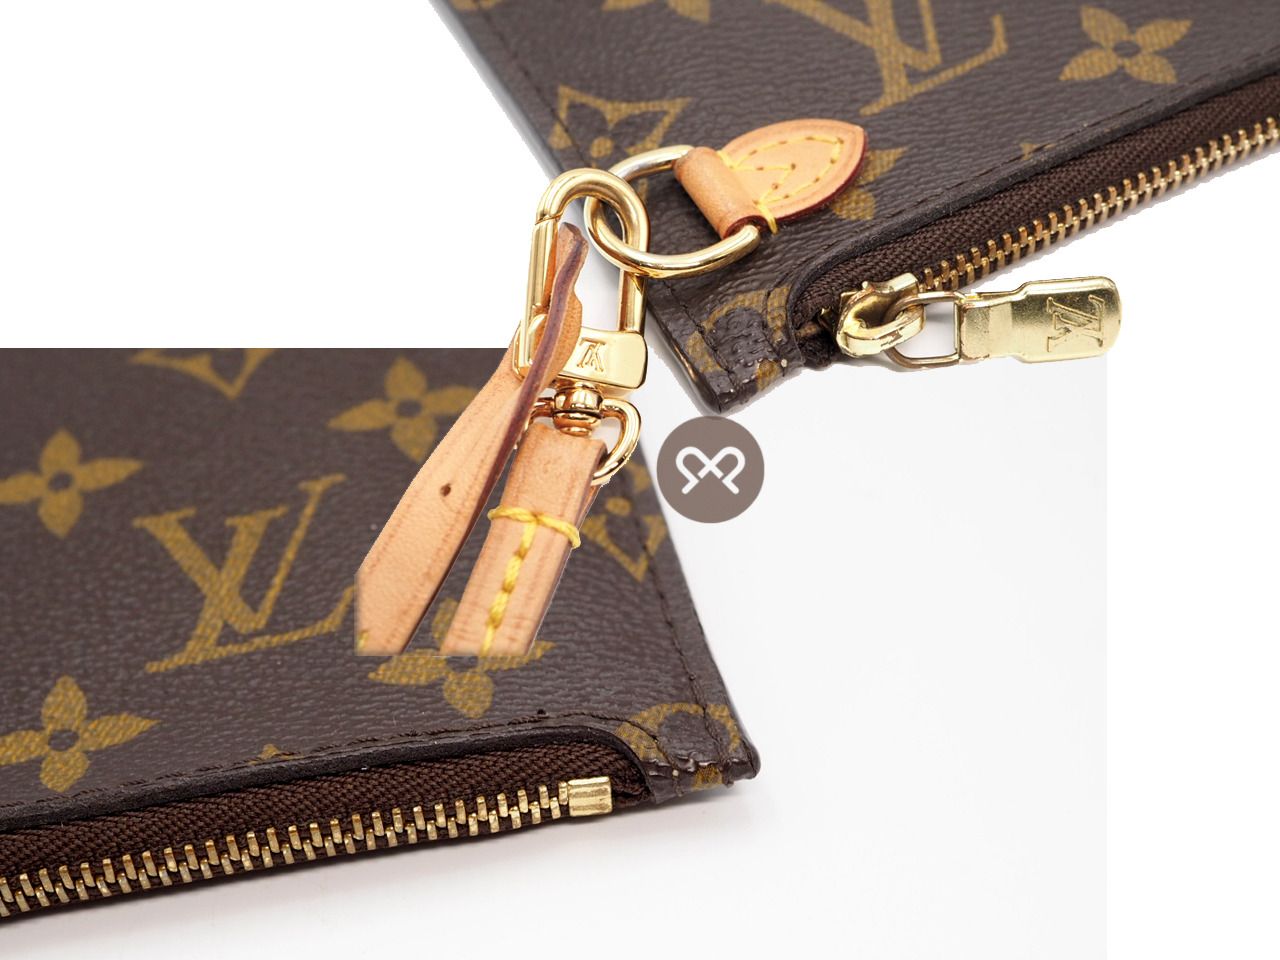 Louis Vuitton Monogram M40995 Neverfull MM Shopping Bag with Pouch (CA0154)